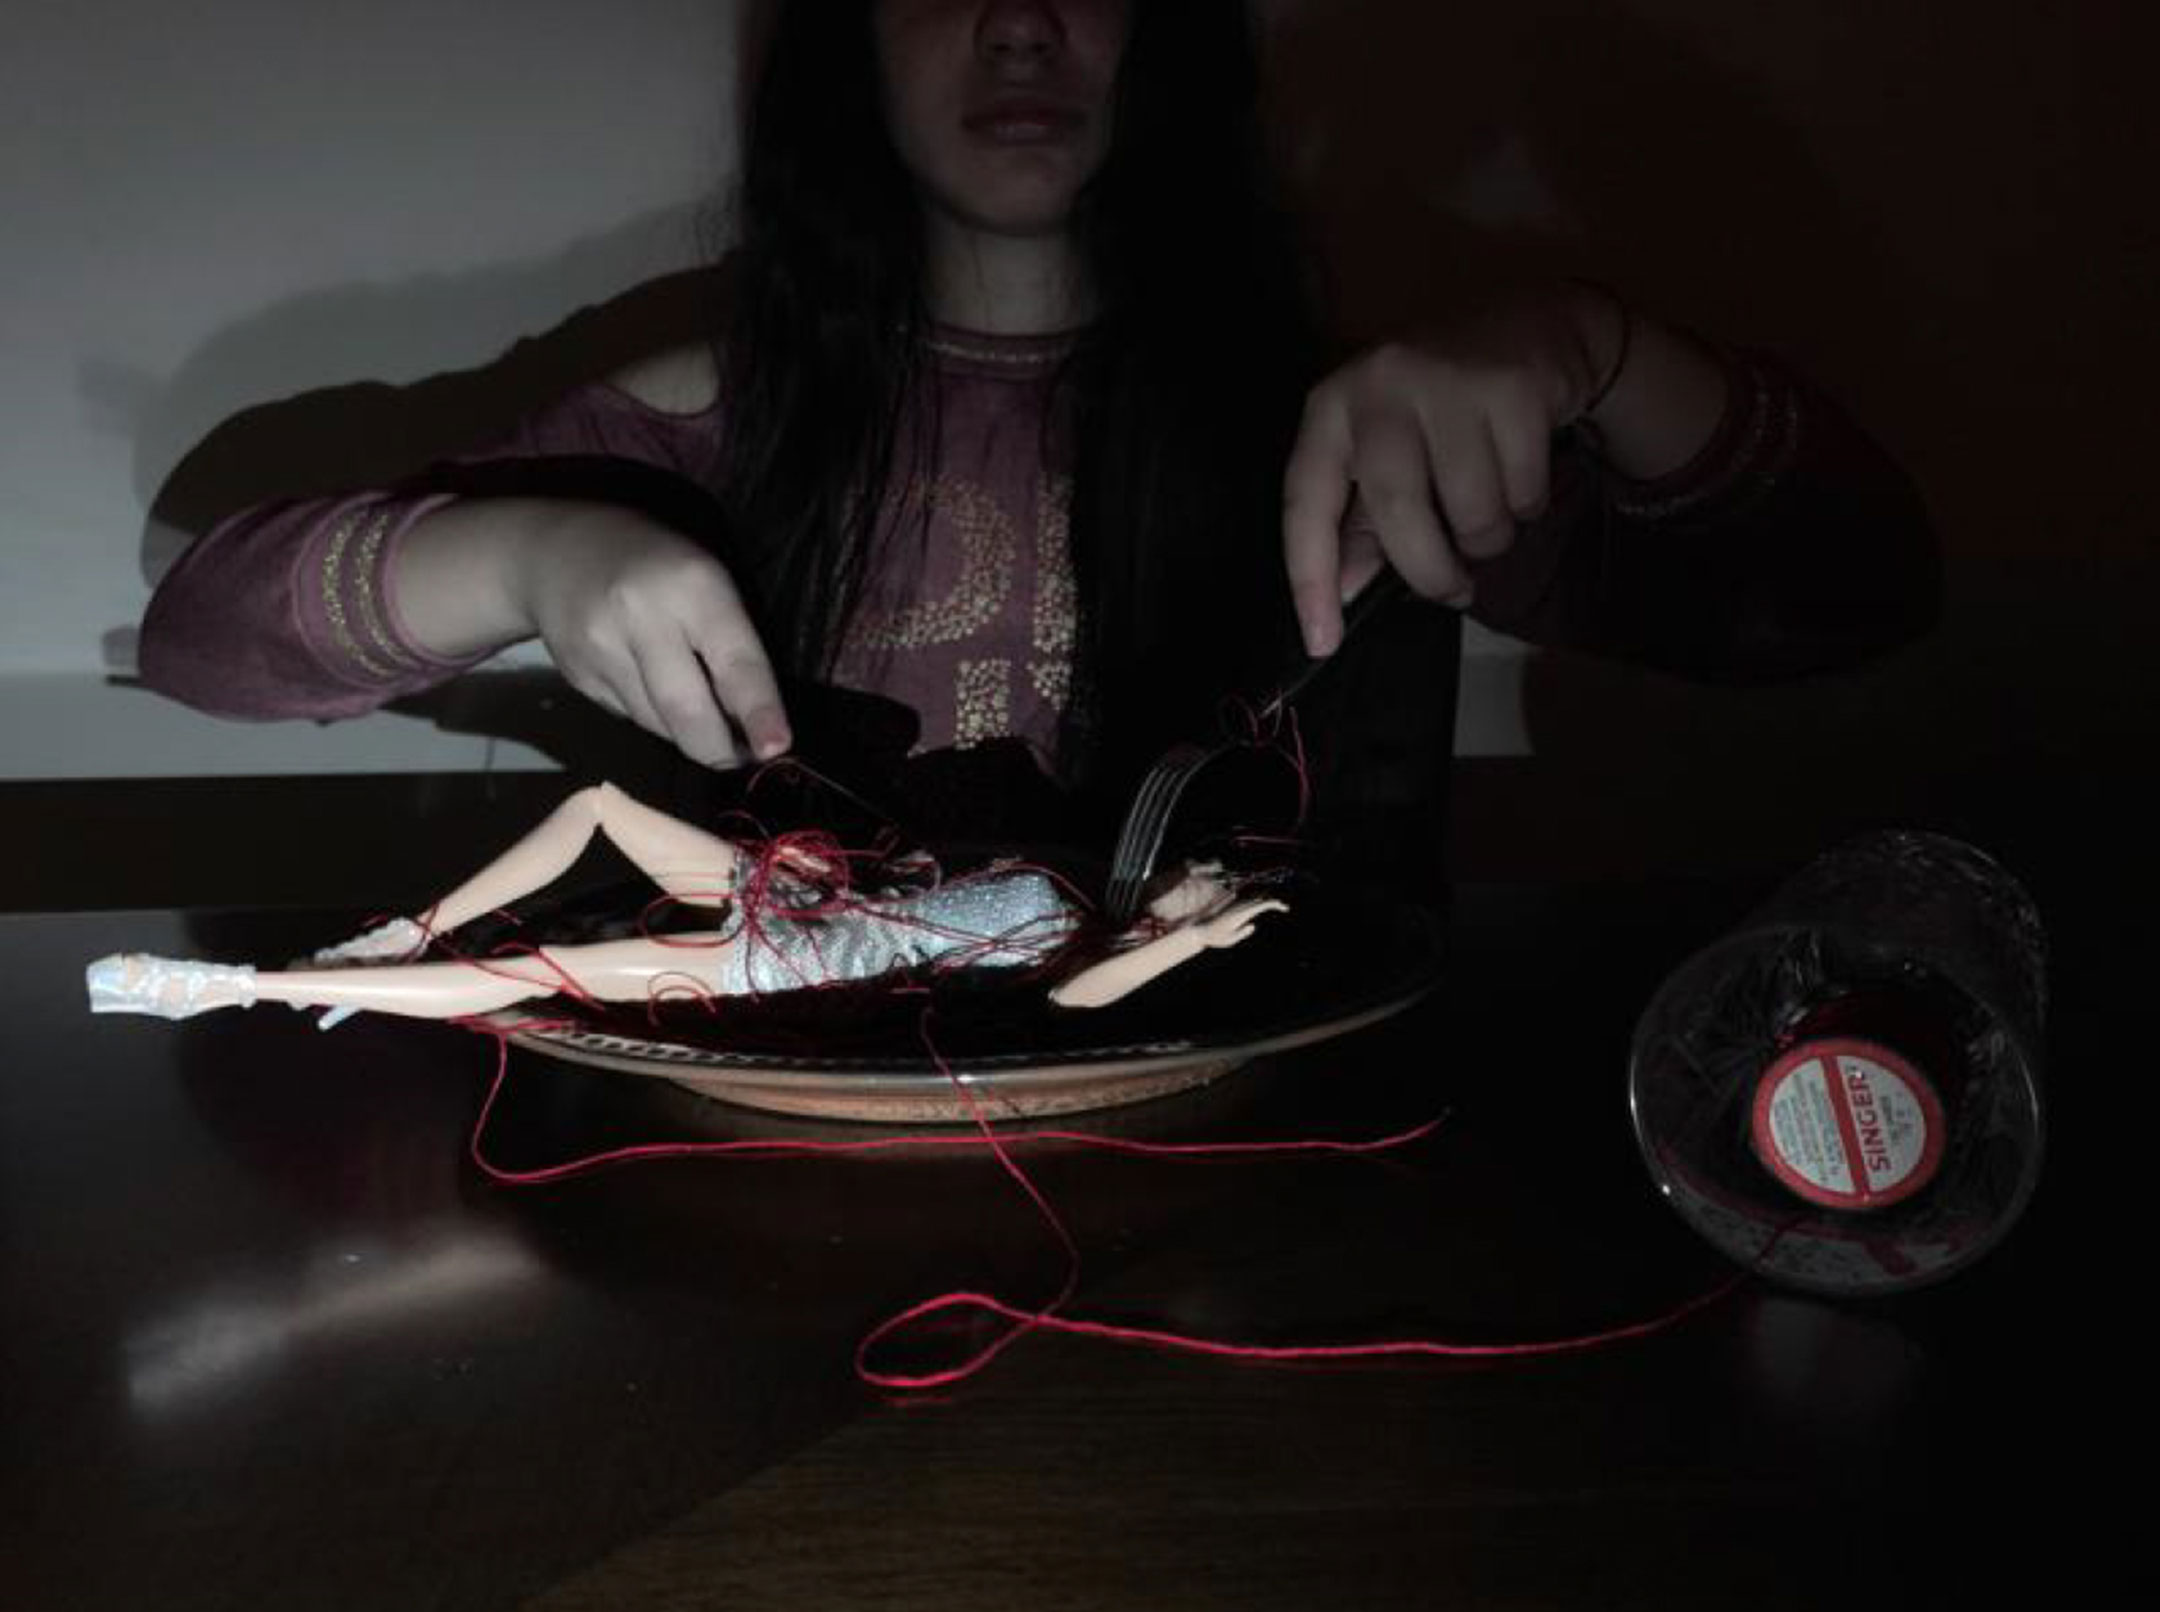 Dark photograph of a girl holding a fork and knife as she pretends to eat a Barbie doll